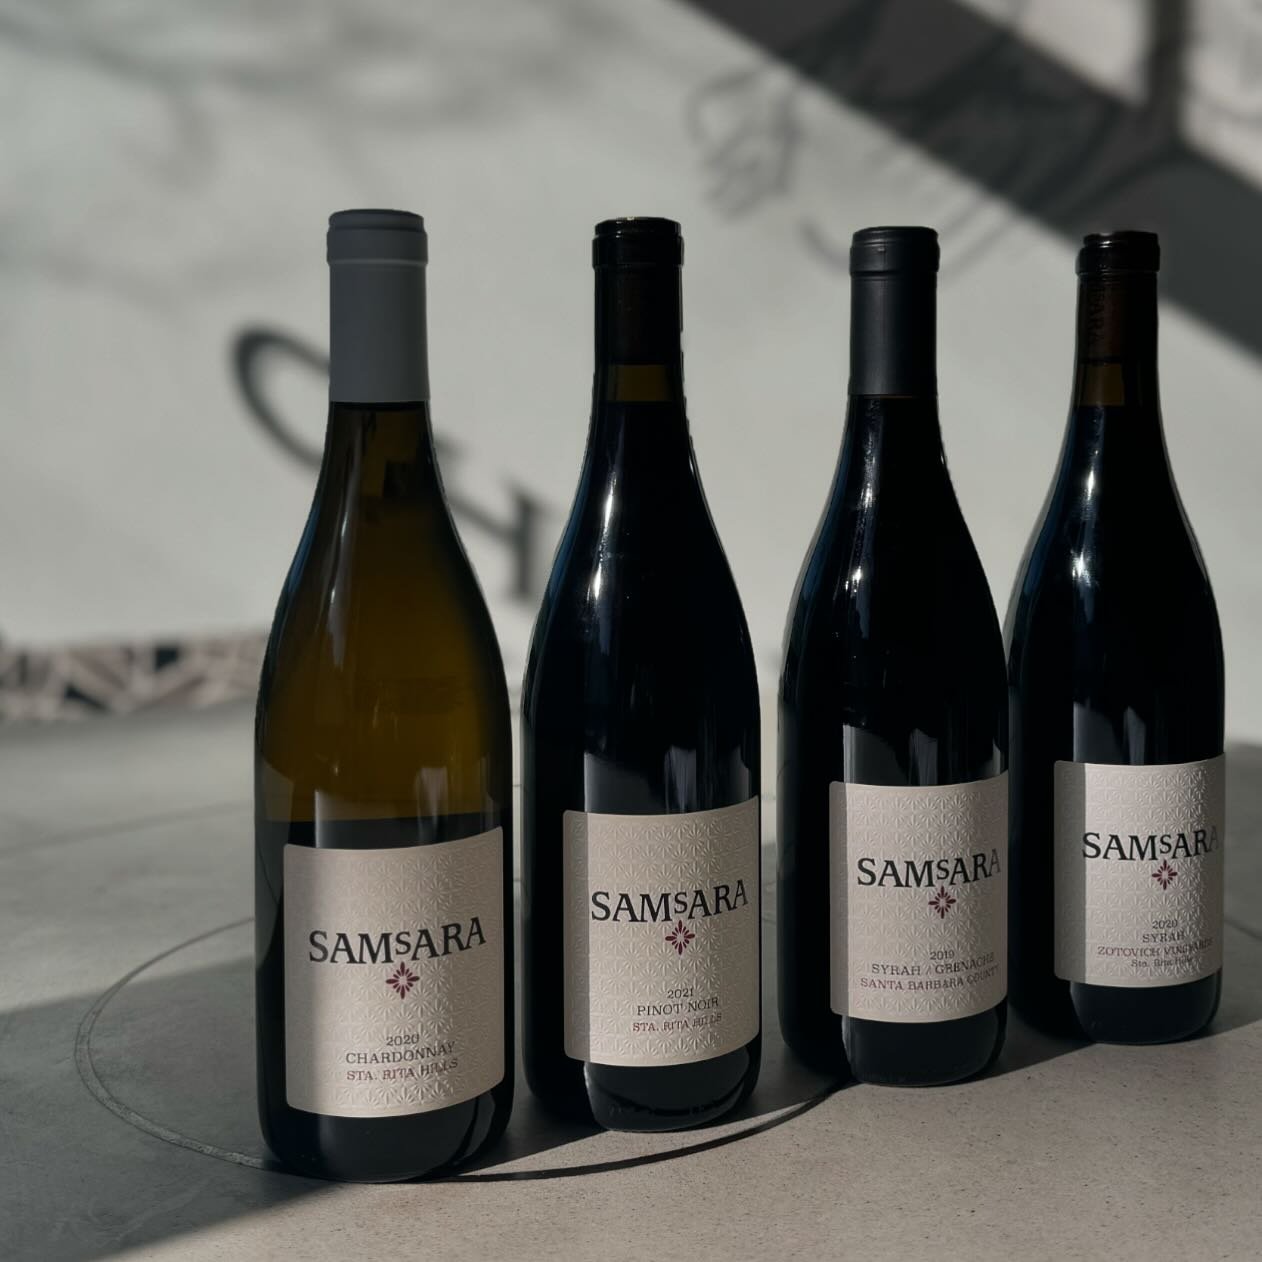 Pencil it in your calendar for Wednesday June 12th at 6 PM. We are doing a wine dinner with Samsara Wine Co. And Owner Joan Szkutak. We love these wine and their expressions of Syrah, Pinot Noir, Grenache &amp; Chardonnay from the Santa Rita Hills re